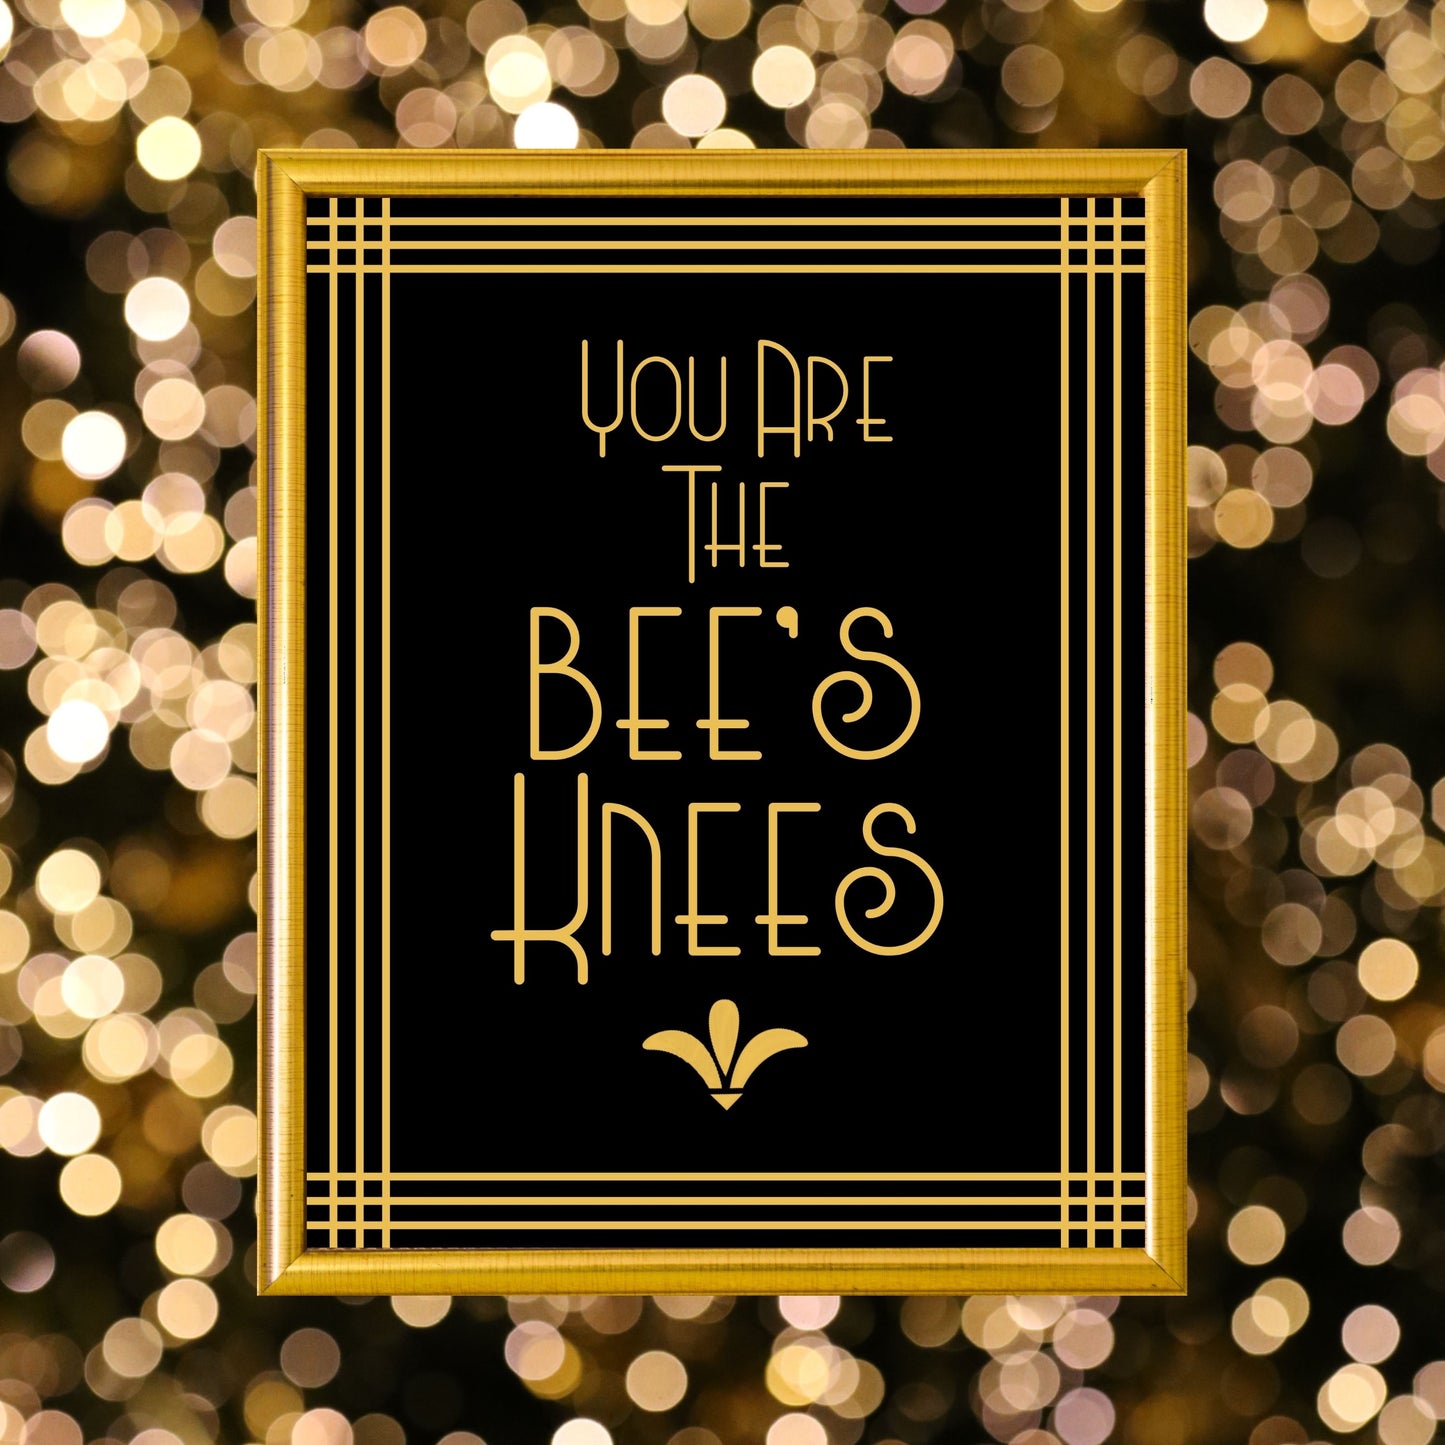 "You Are The Bee's Knees" Printable Party Sign For Great Gatsby or Roaring 20's Party Or Wedding, Black & Gold, Printable Party Decor